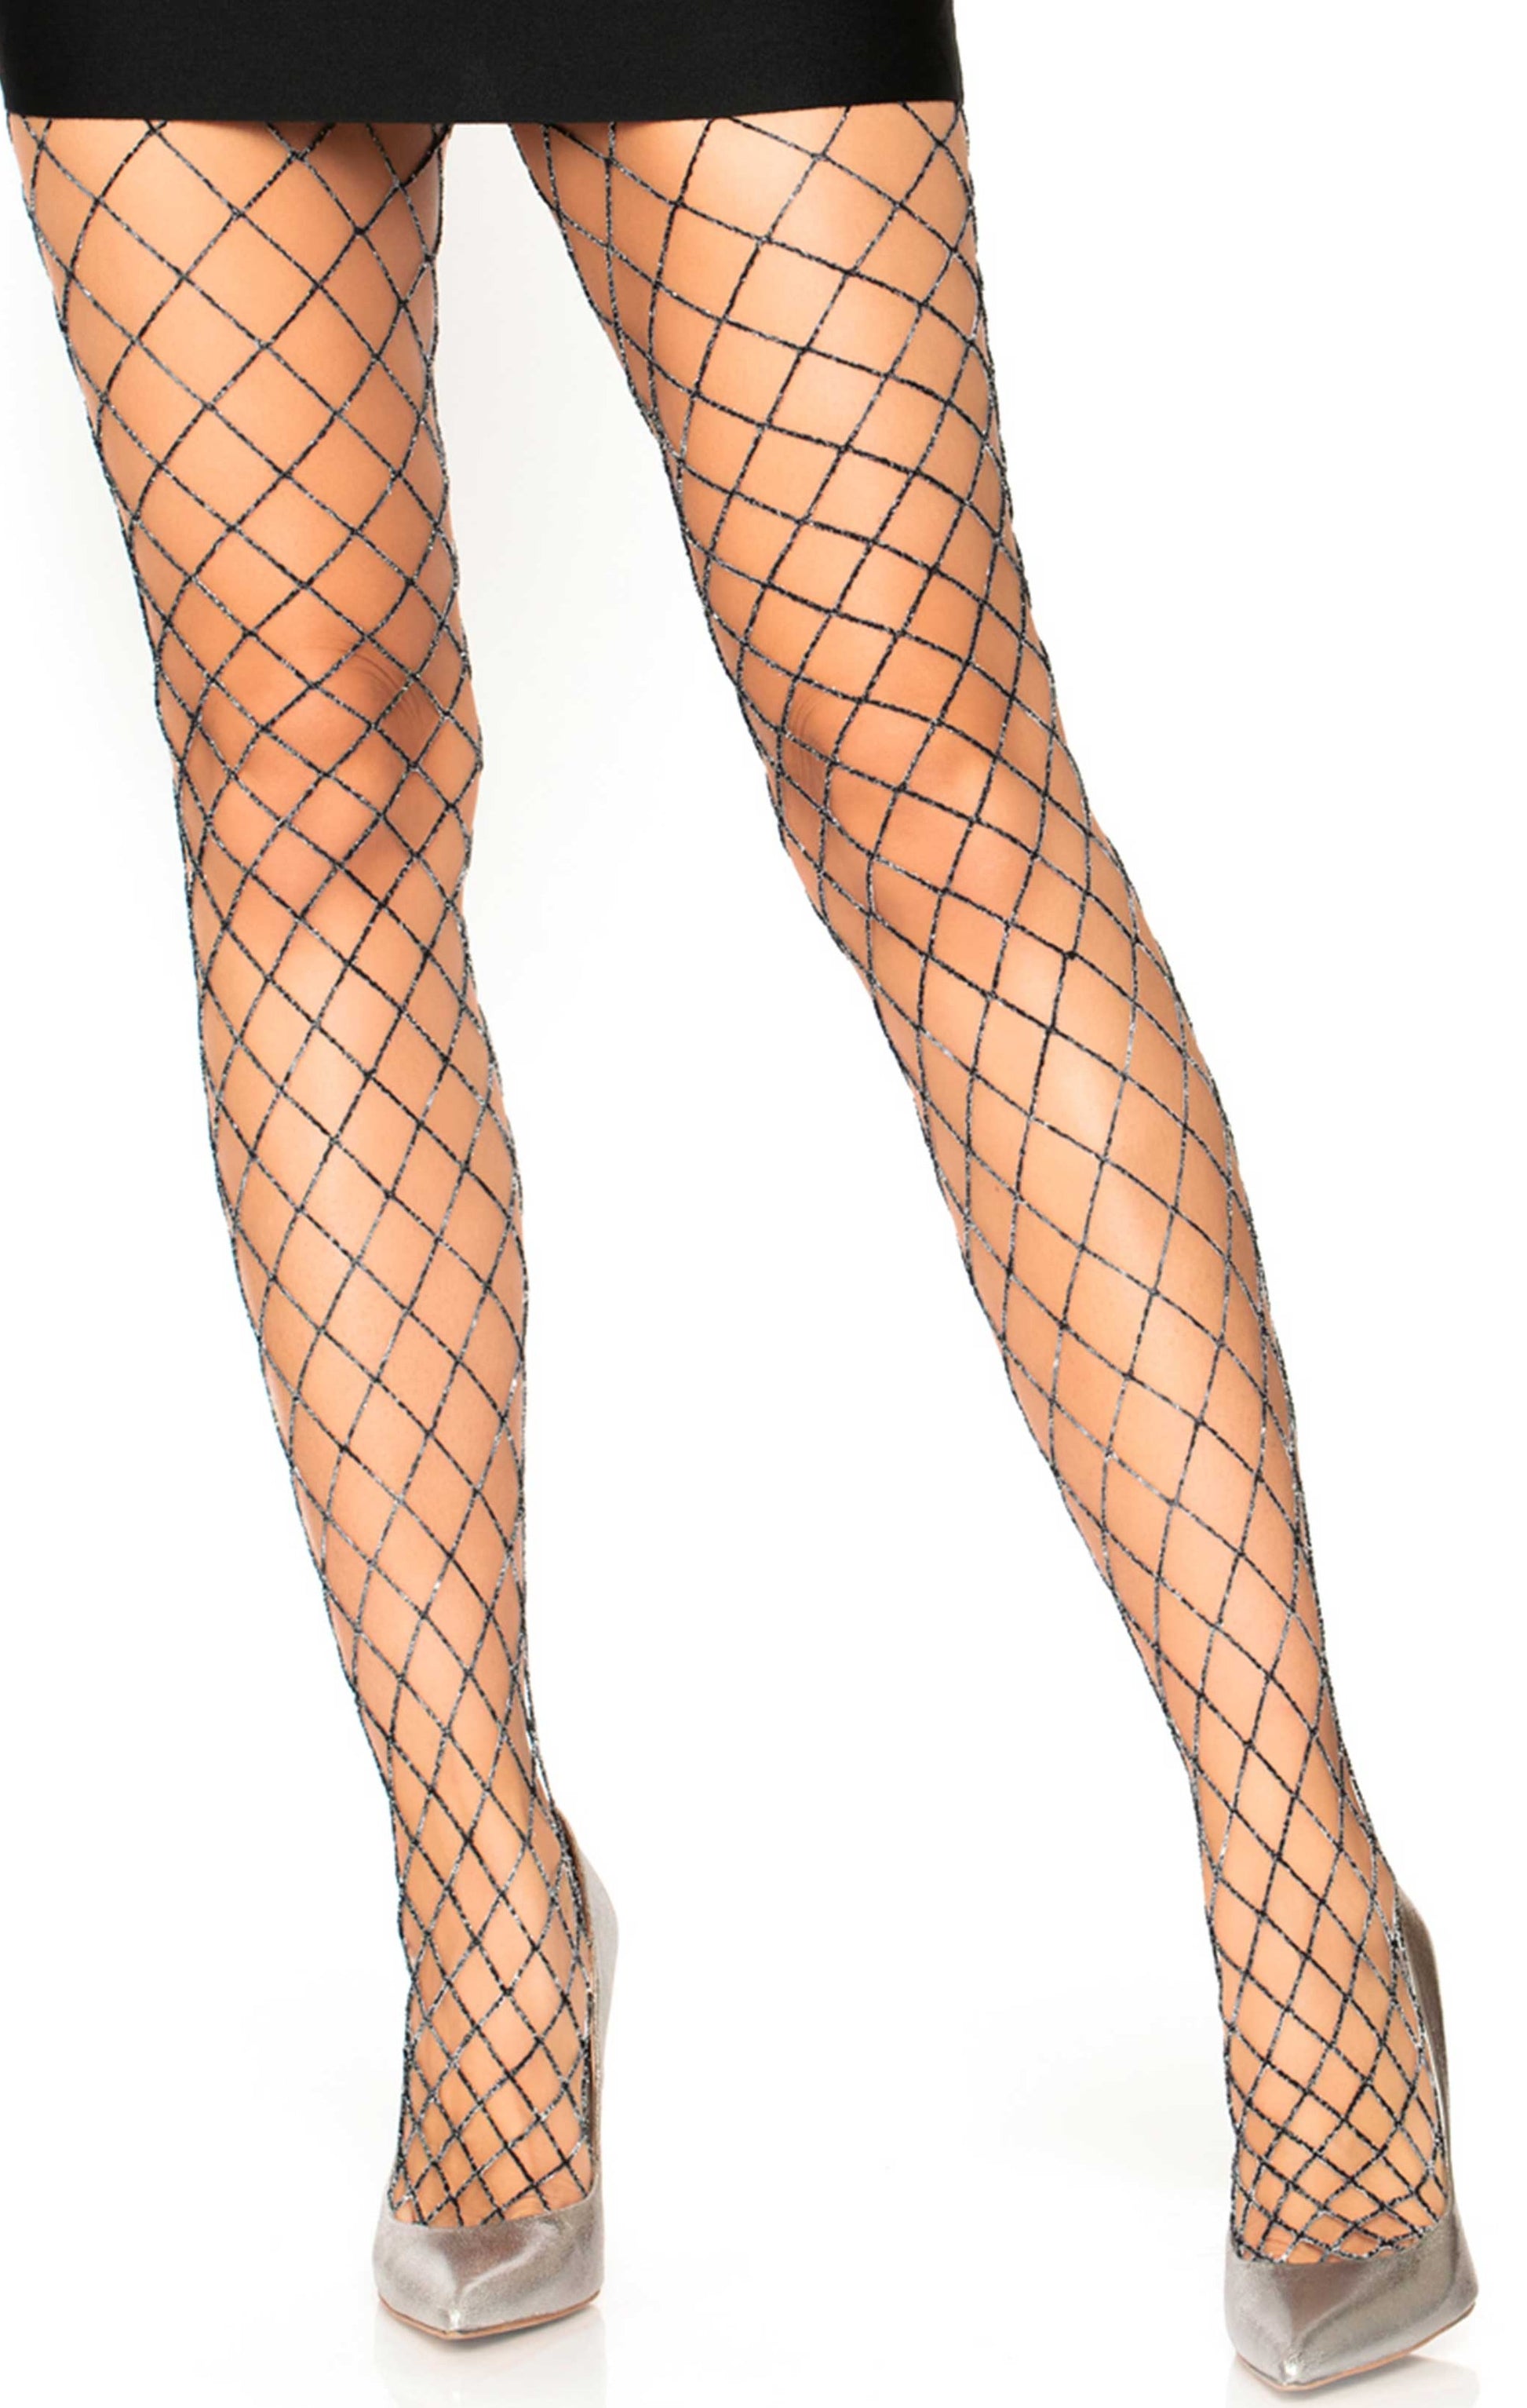 Leg Avenue 9006 Lurex Fishnet Tights - Black diamond fishnet tights with sparkly silver lame' throughout, perfect for the party season.